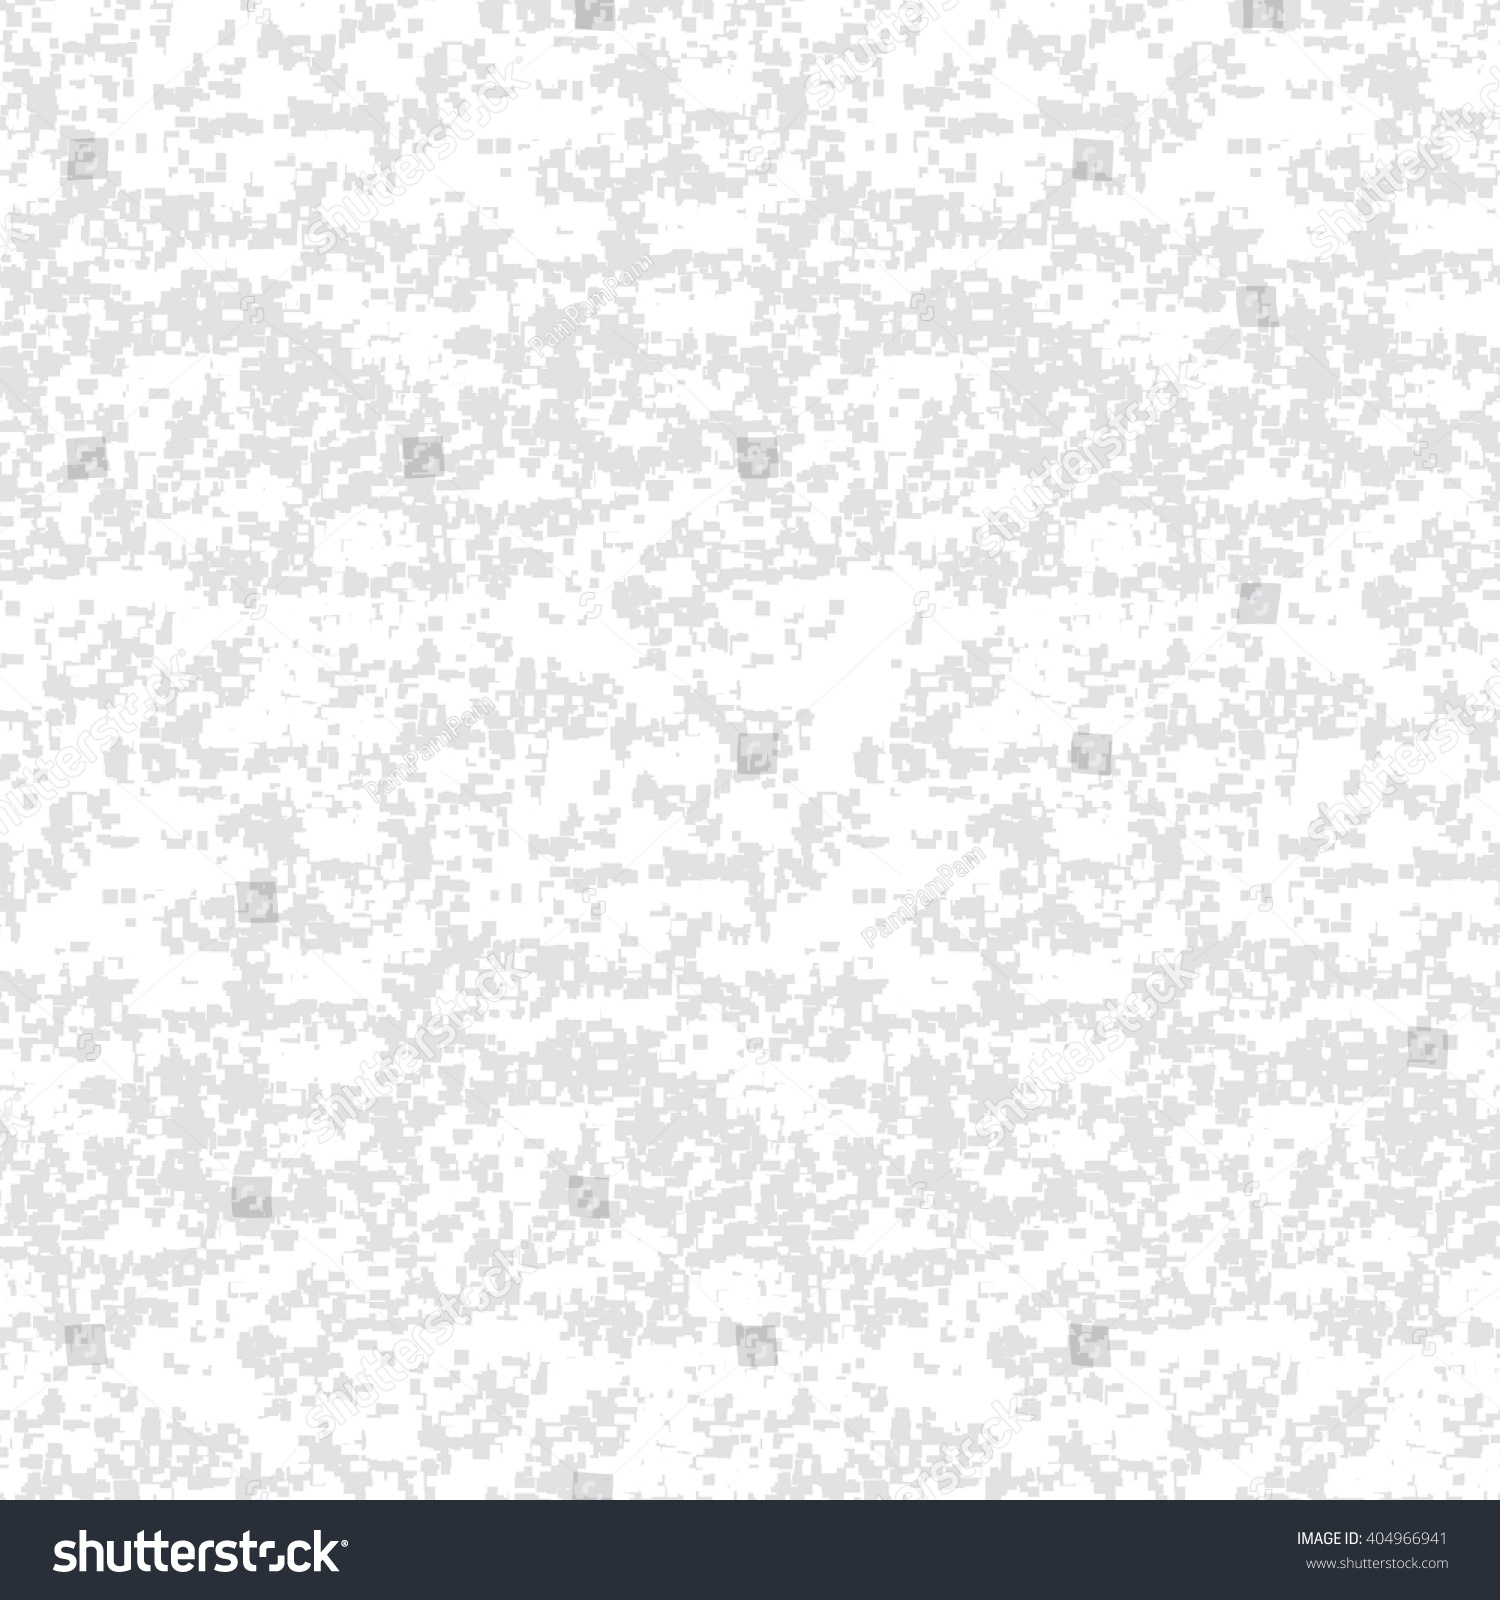 2color Digital Snow Camouflage Second Version seamless Stock Vector ...